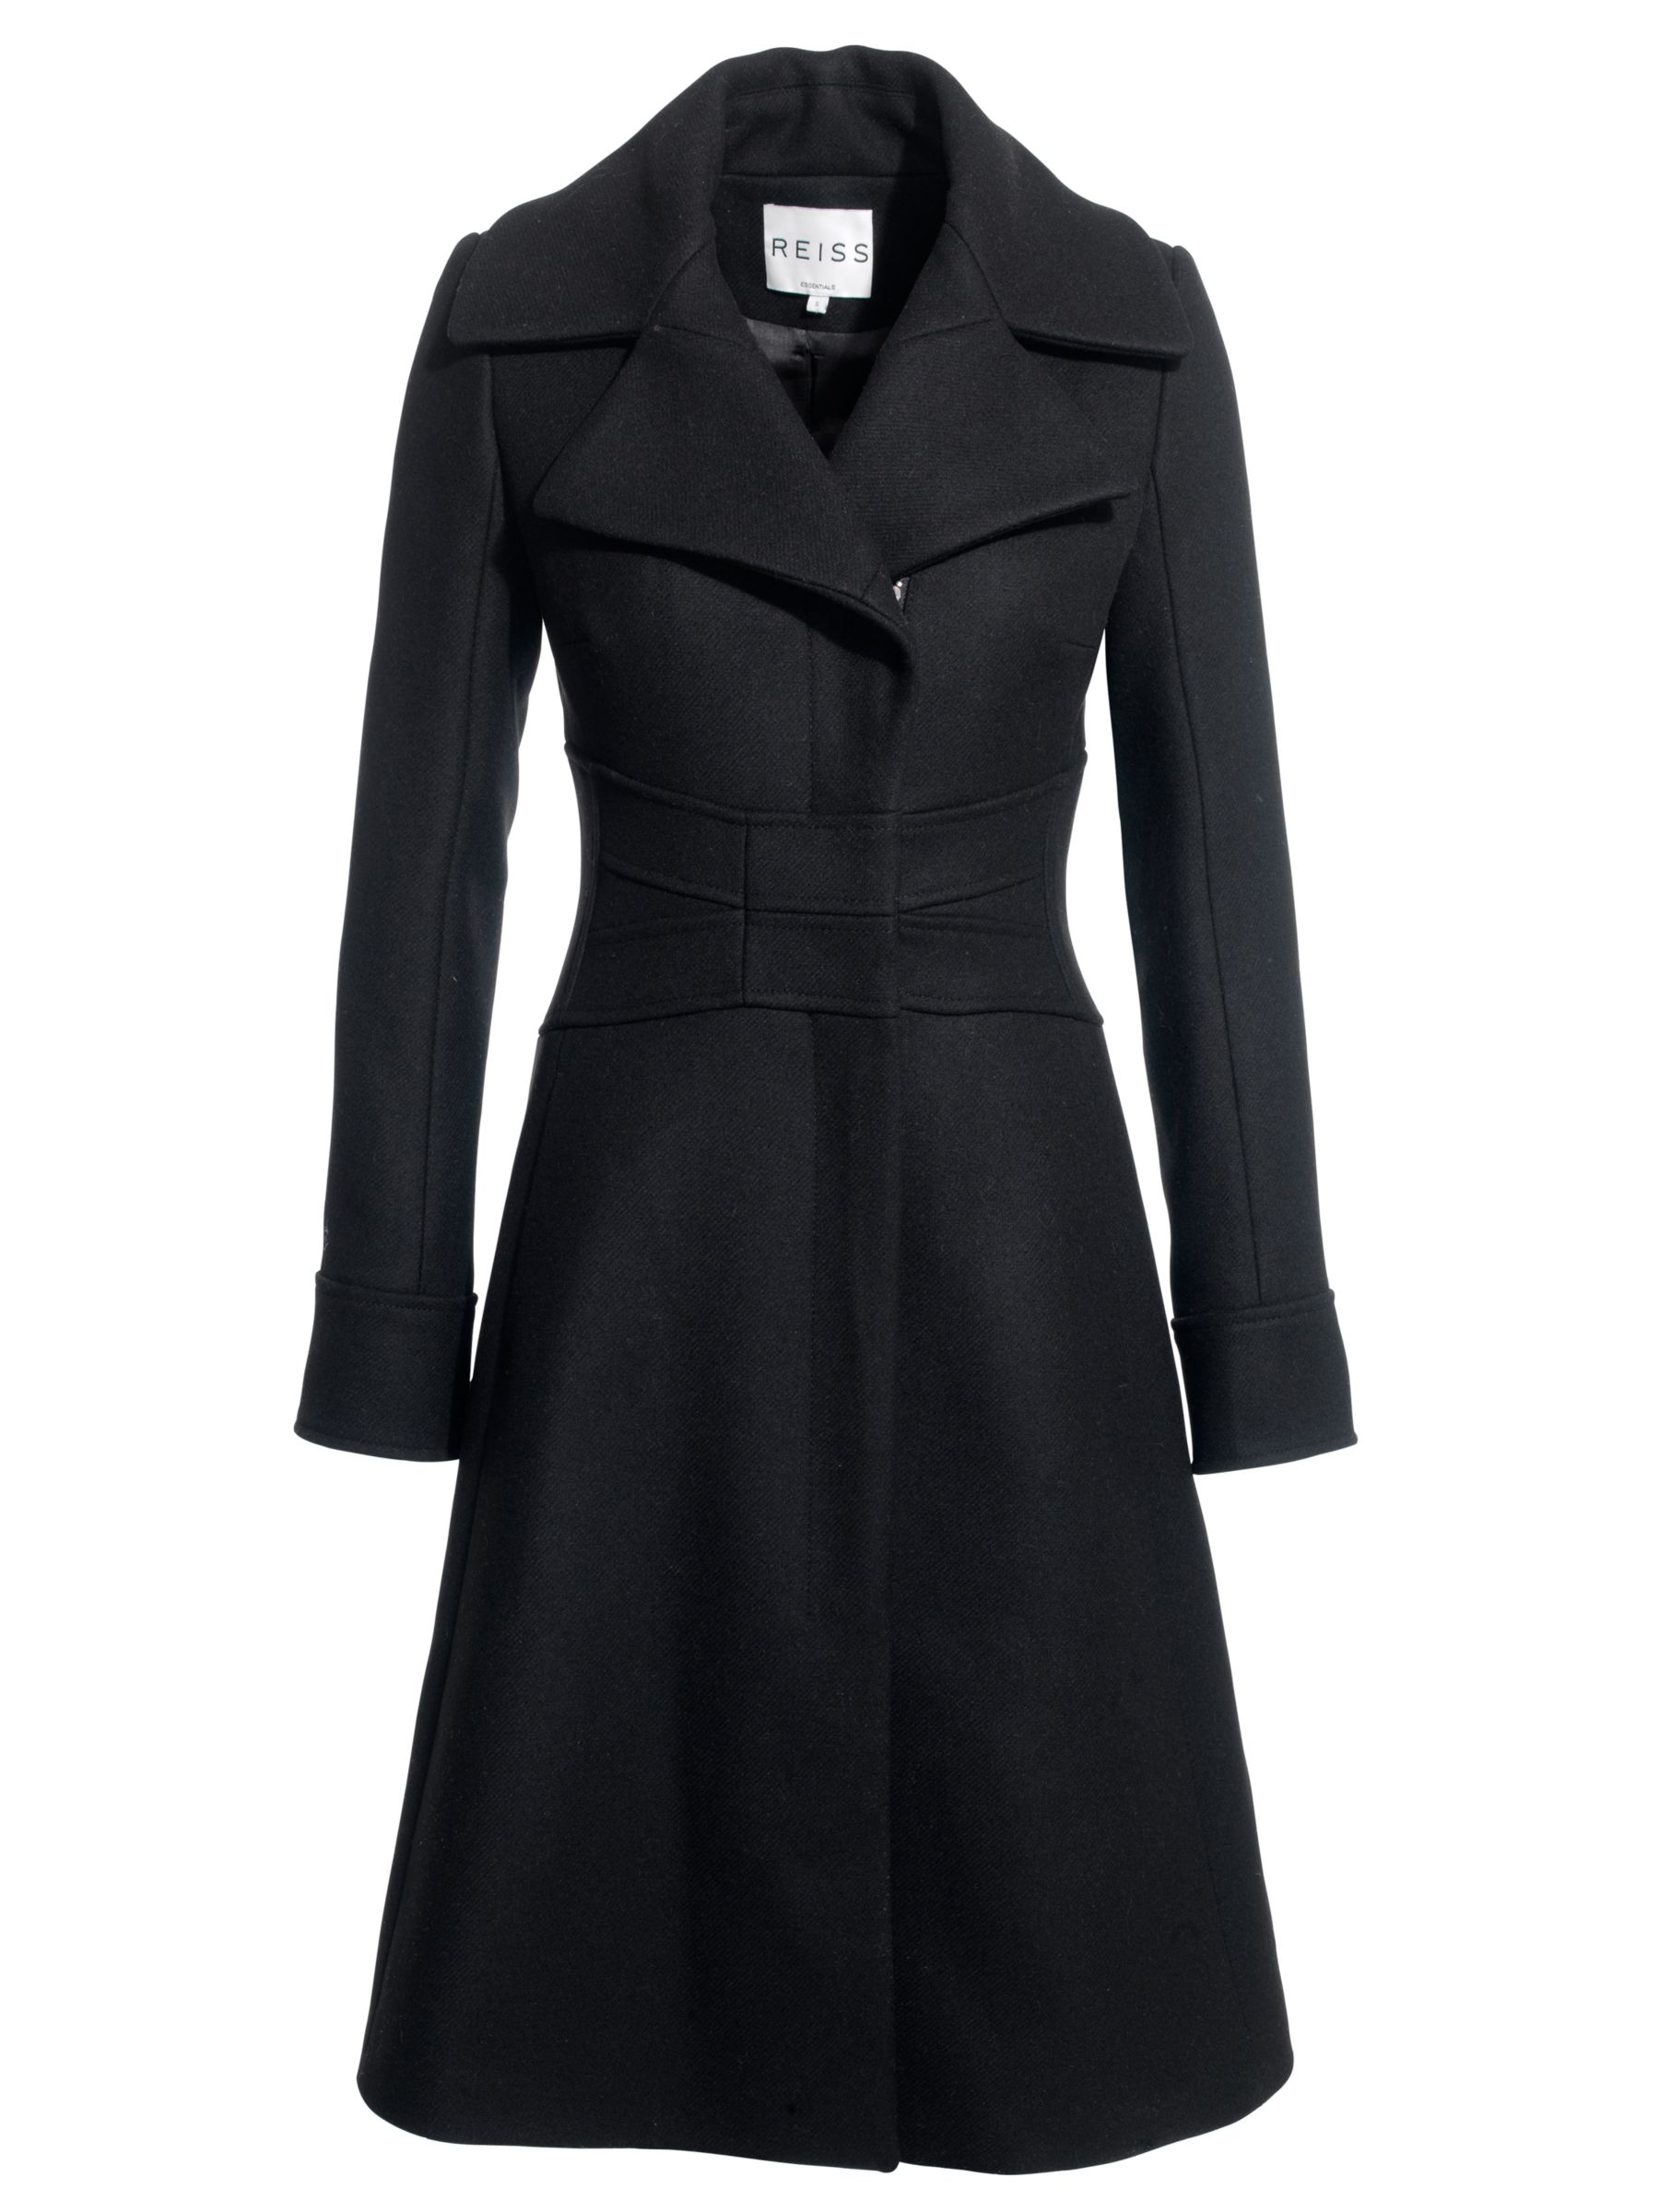 Reiss Coco Fit And Flare Coat, Black at JohnLewis